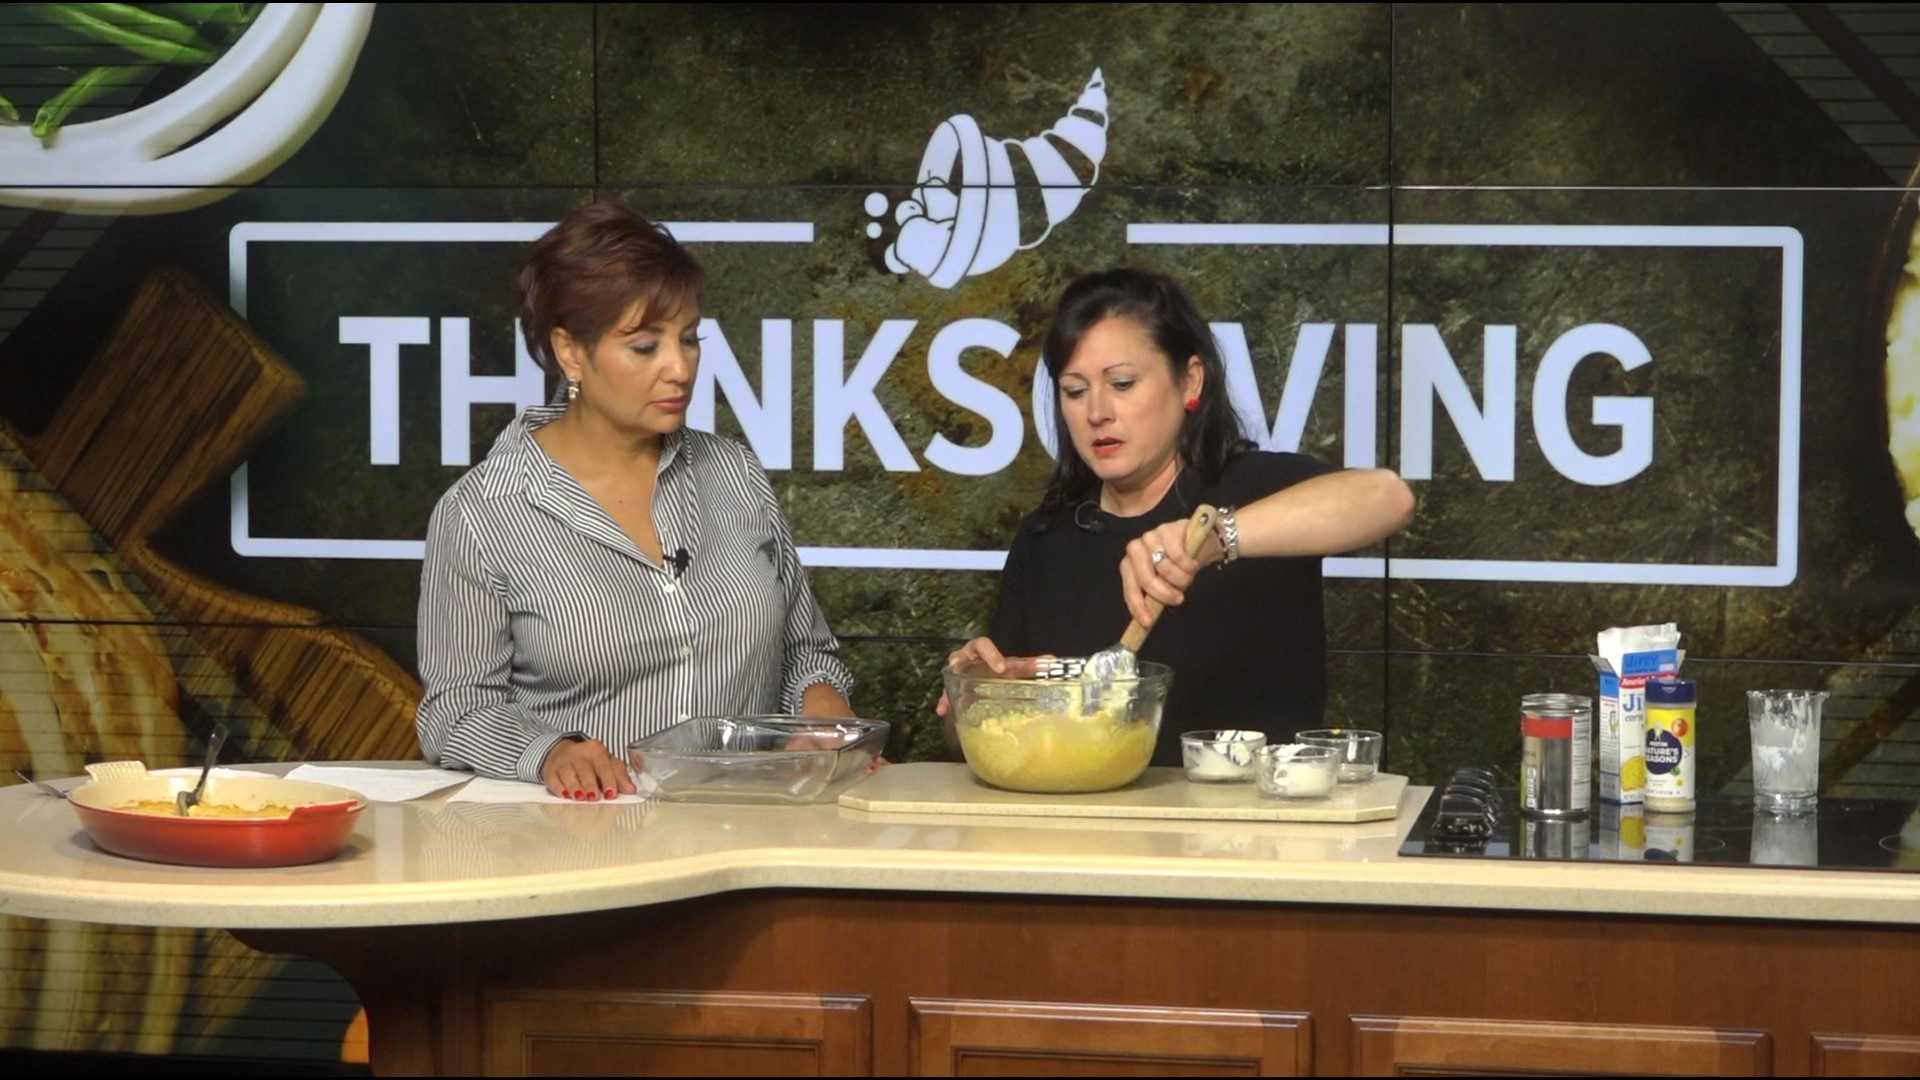 Author and cook Suzanne Johnson whips up some cheesy corn casserole just in time to serve at Thanksgiving!